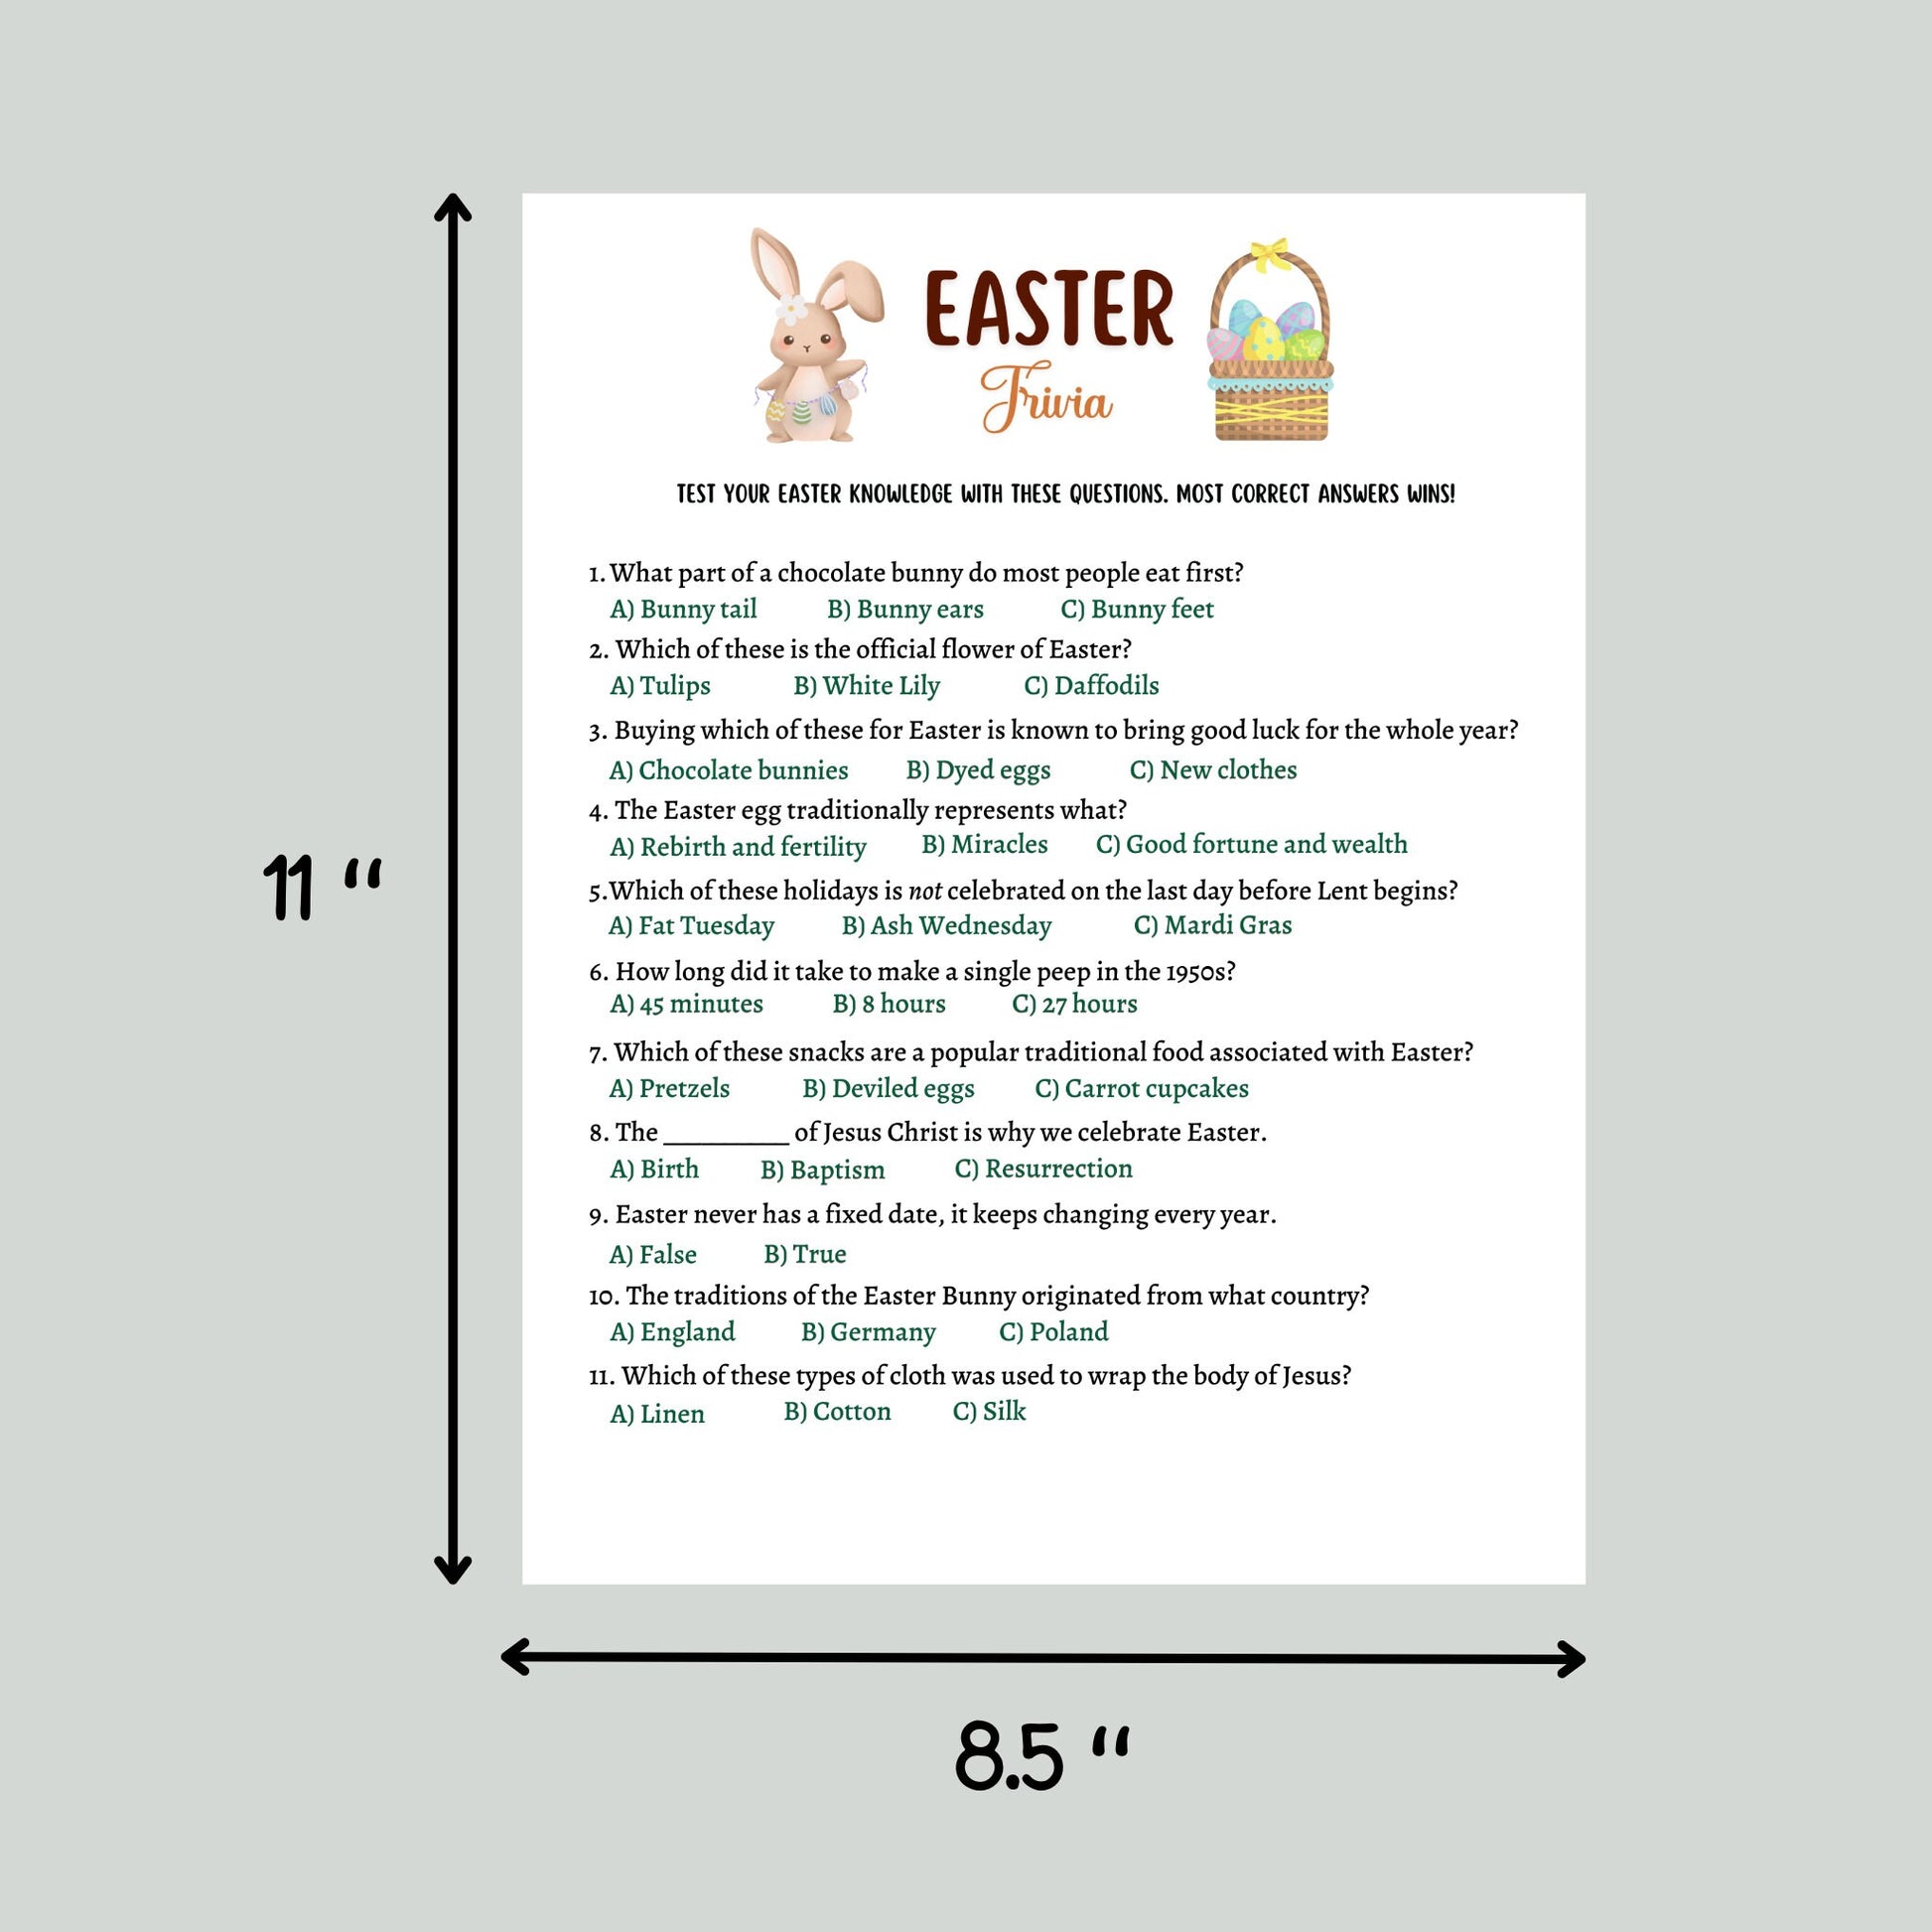 Easter Trivia Party Game Printable, Easter Games, Easter Activity for Kids and Adults, Fun Easter Dinner Game, Family Game, Classroom Game